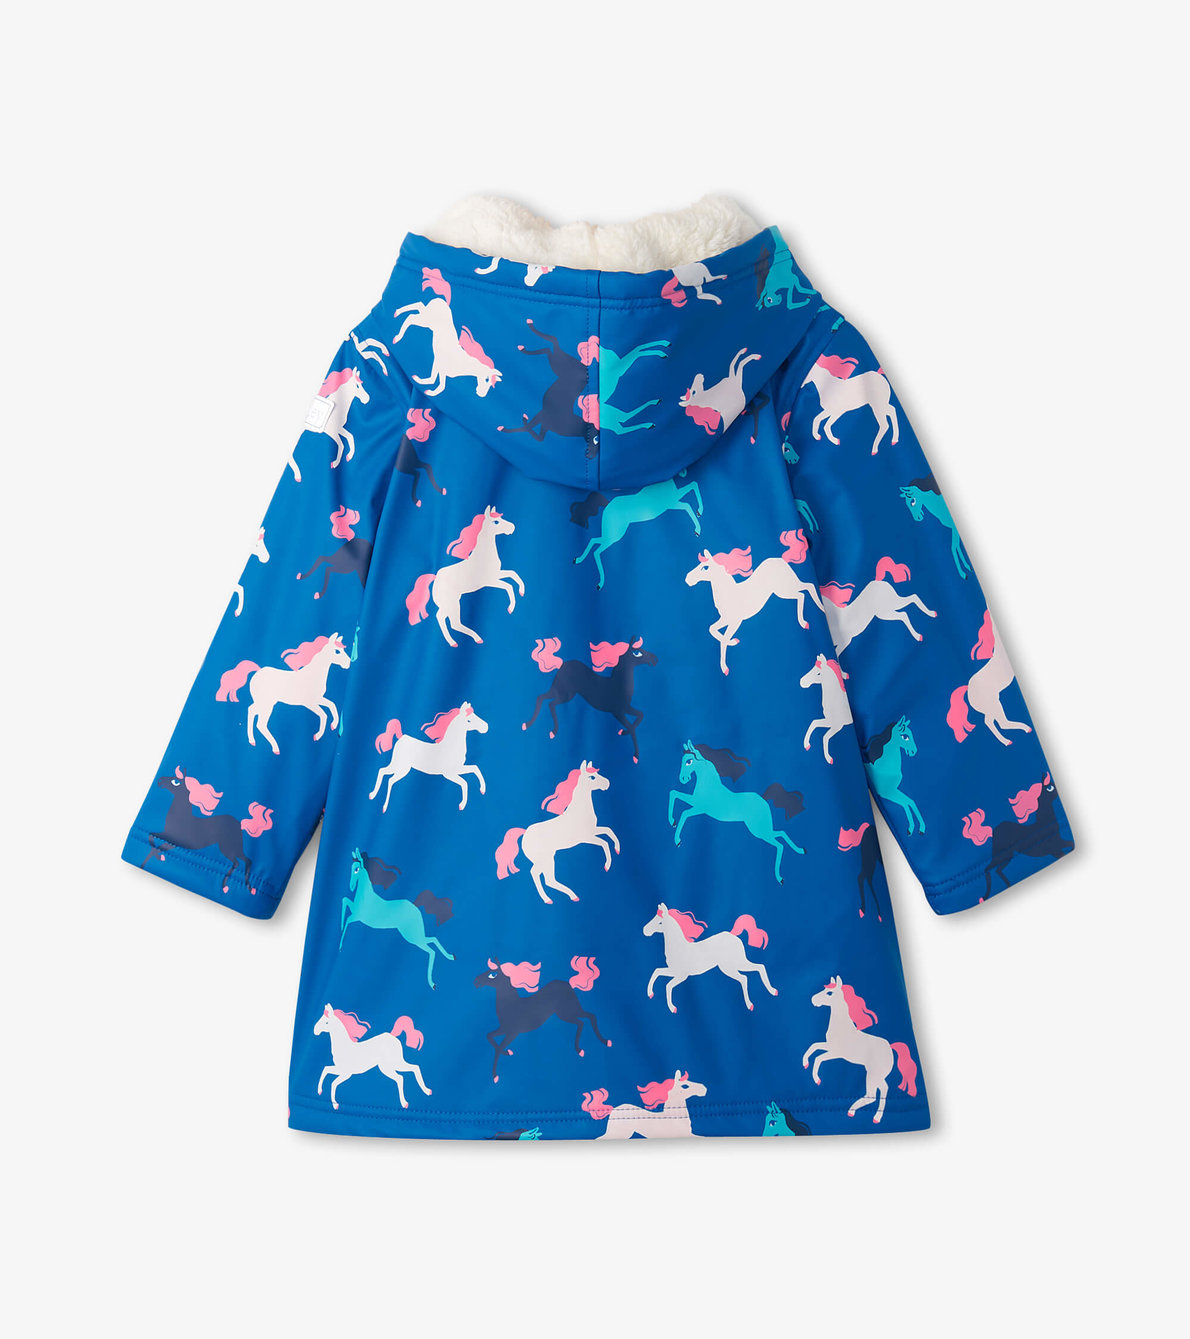 View larger image of Prancing Horses Colour Changing Sherpa Lined Kids Rain Jacket